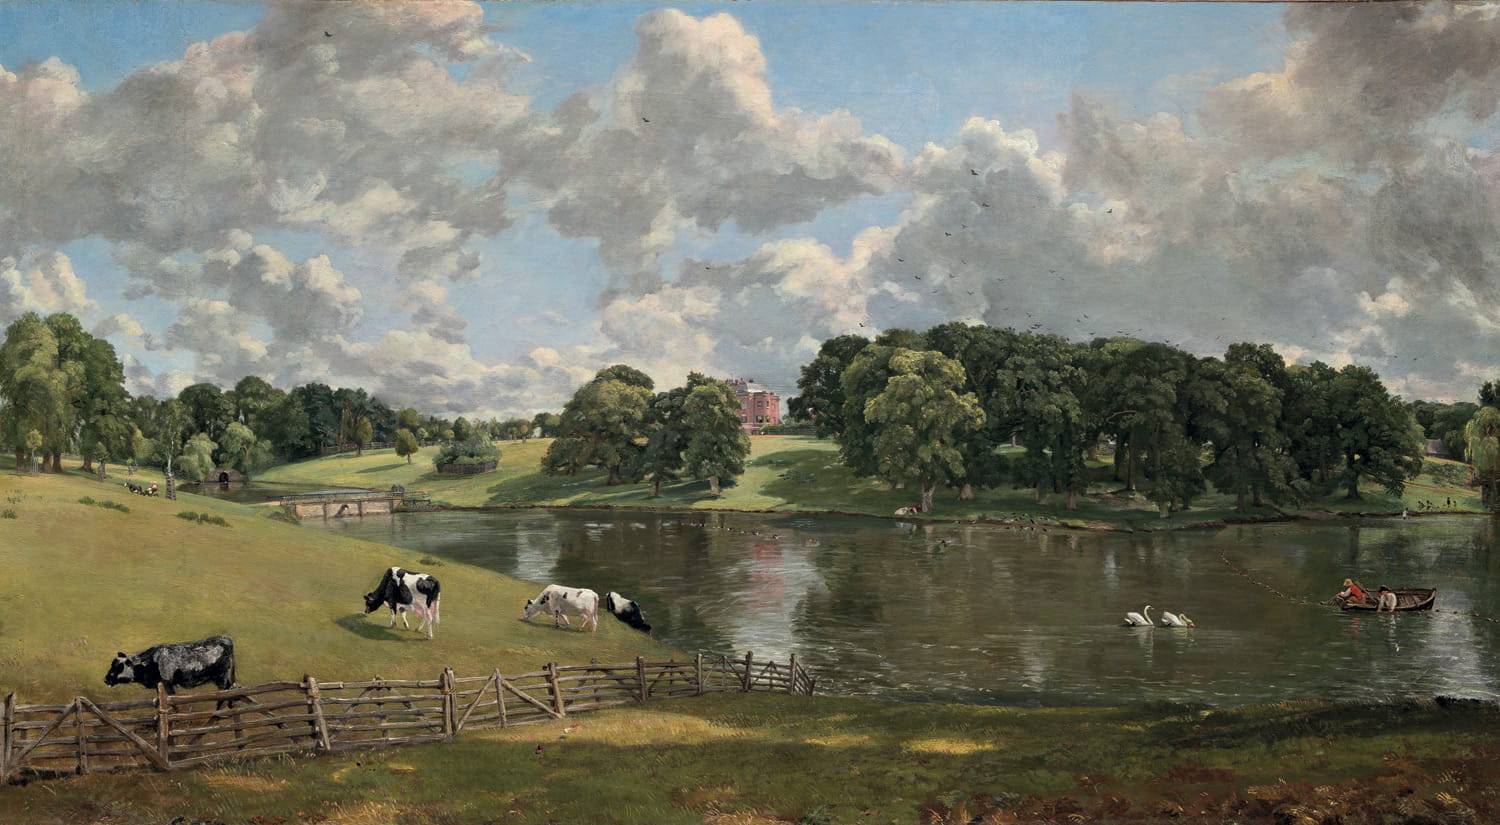 Constable's painting of Wivenhoe Park. Courtesy of the National Gallery of Art, Washington DC.